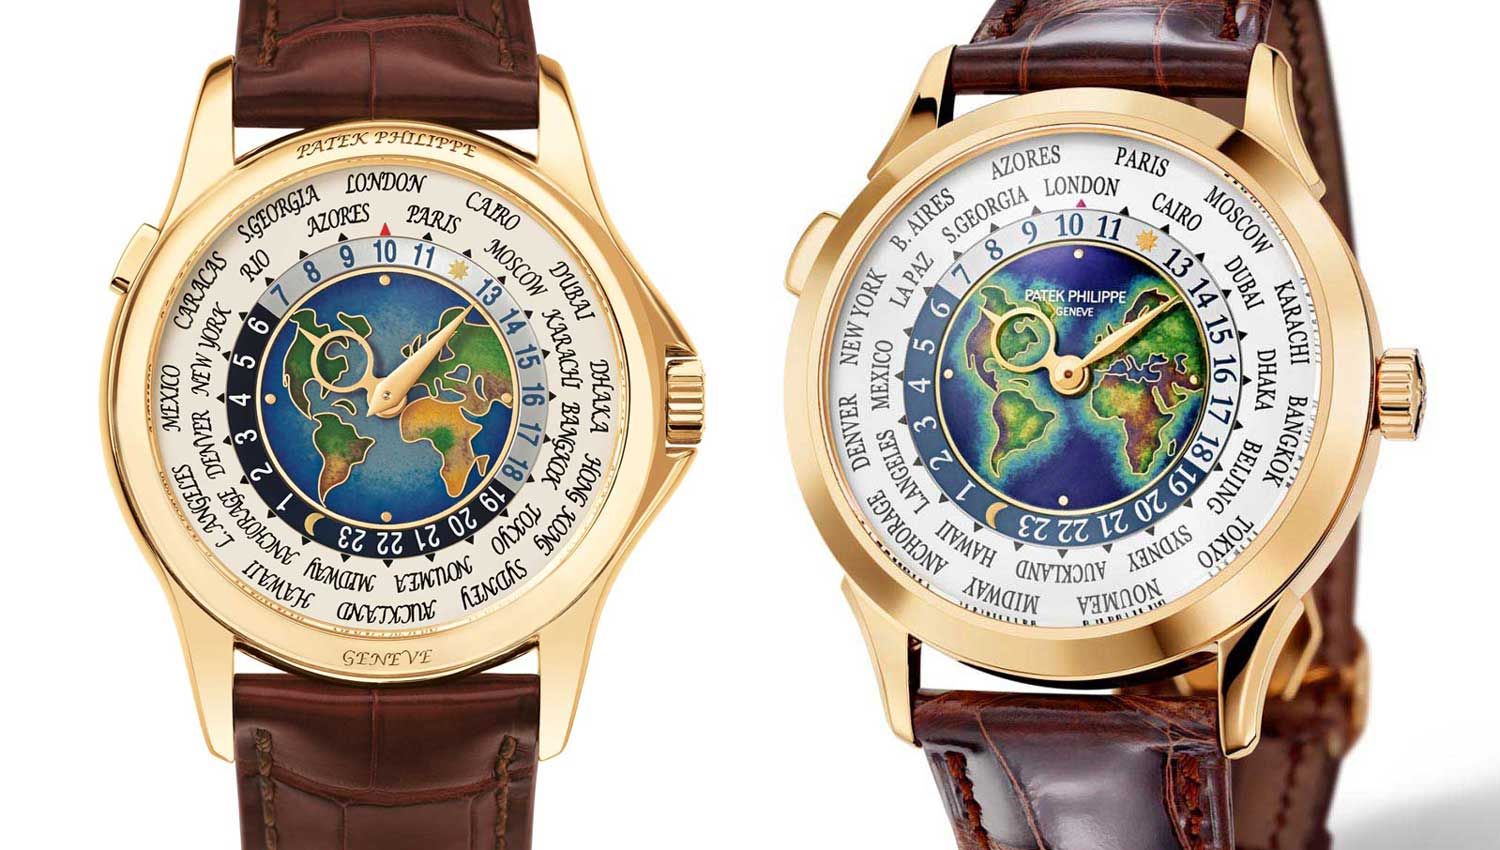 Patek Philippe 5131 on the left and 5231 on the right